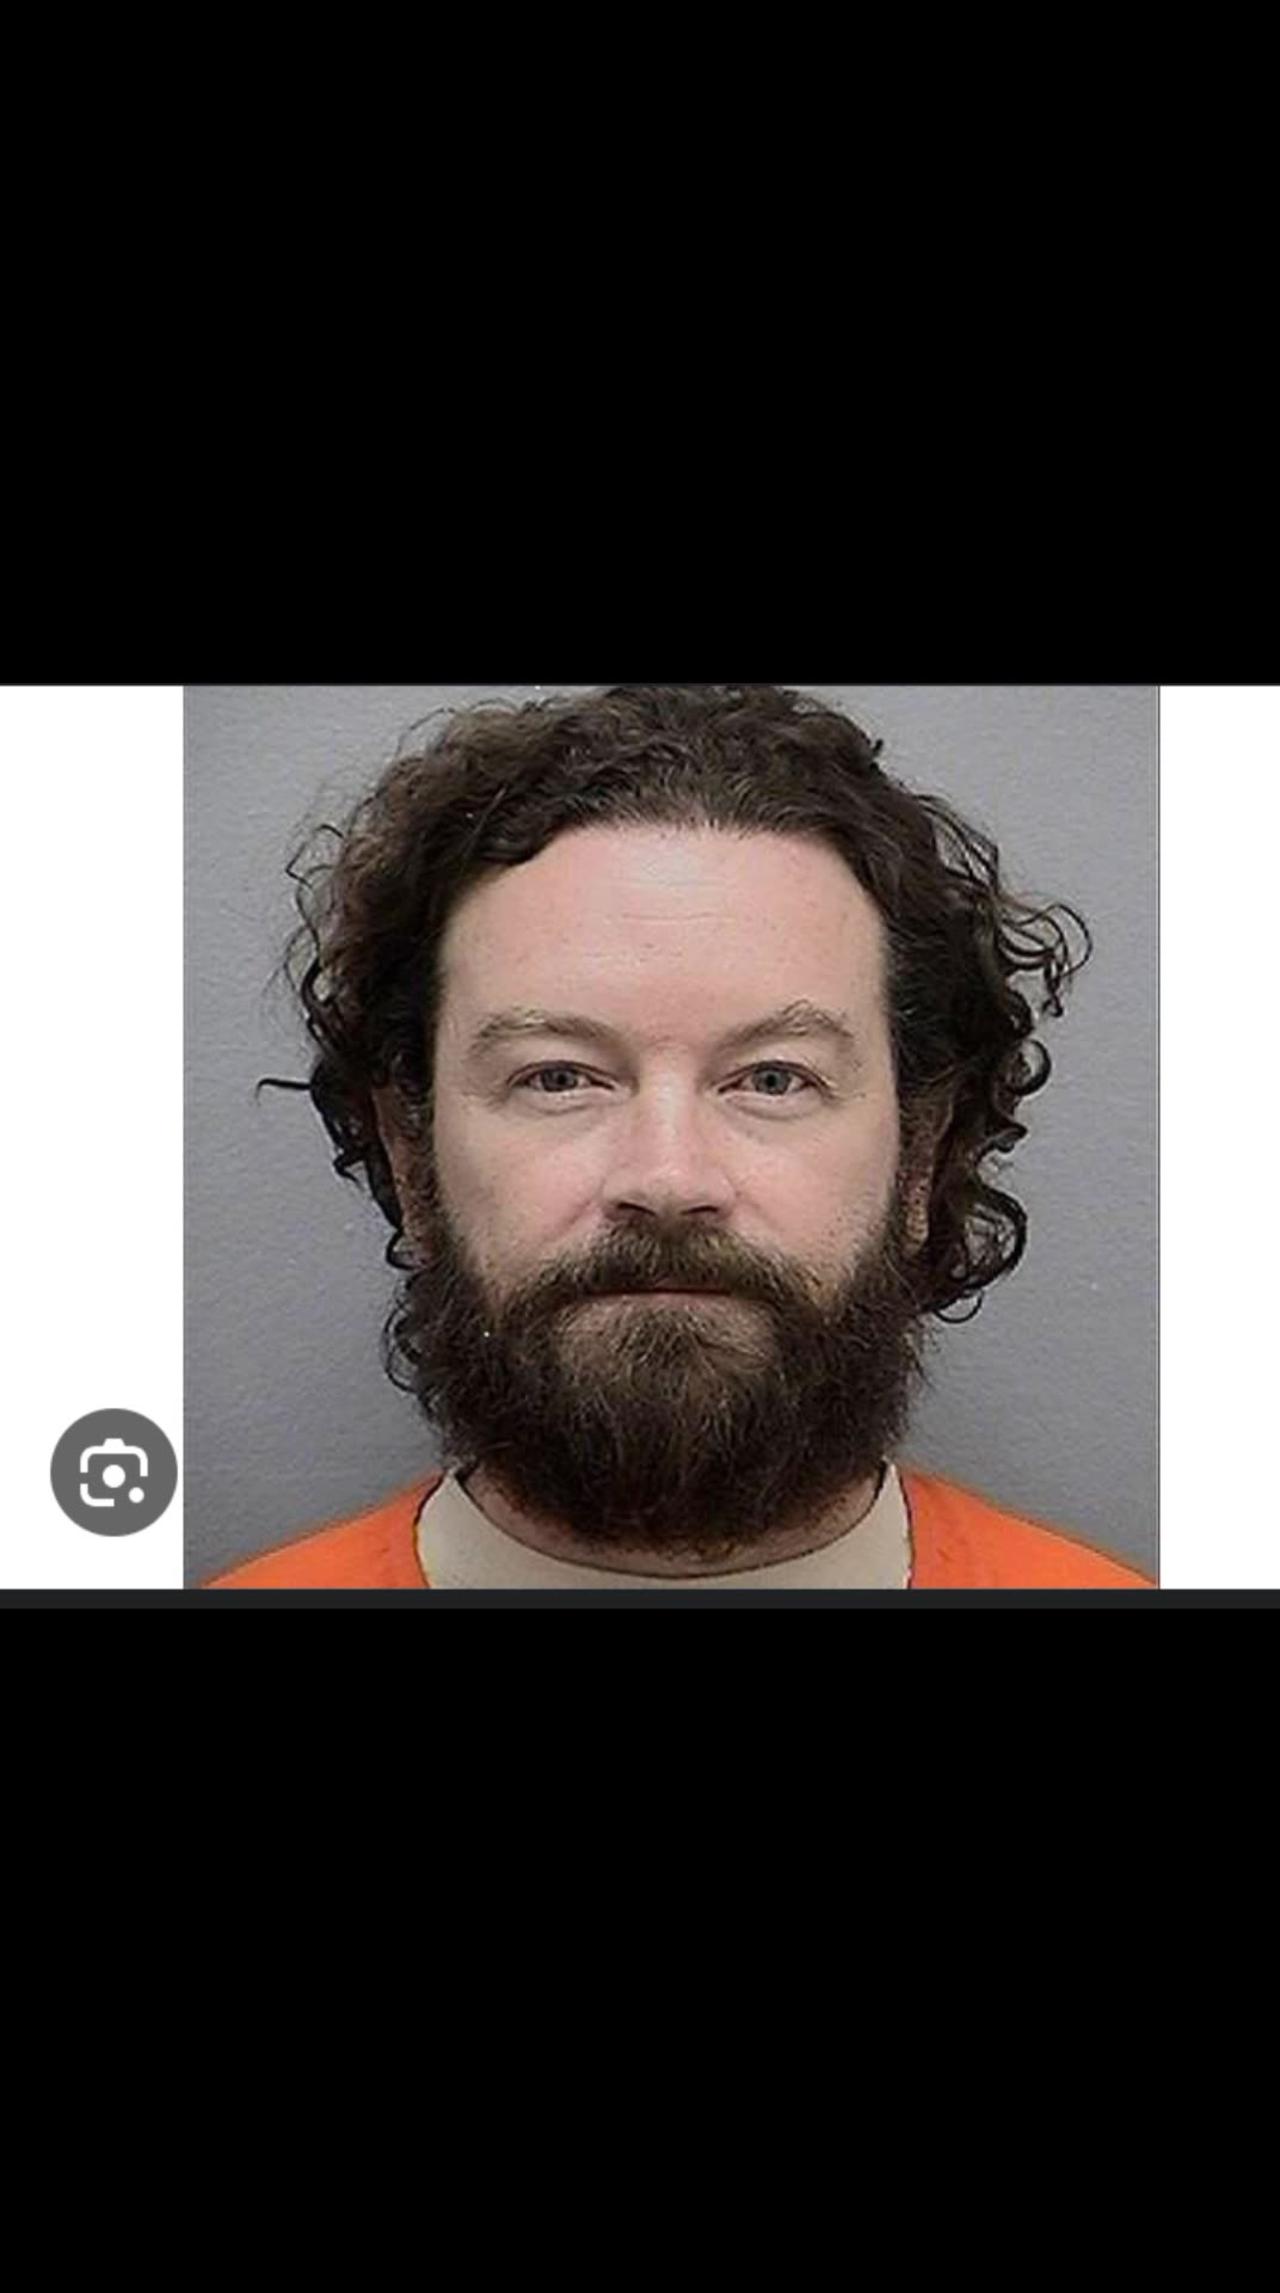 Danny masterson's surrendered firearms